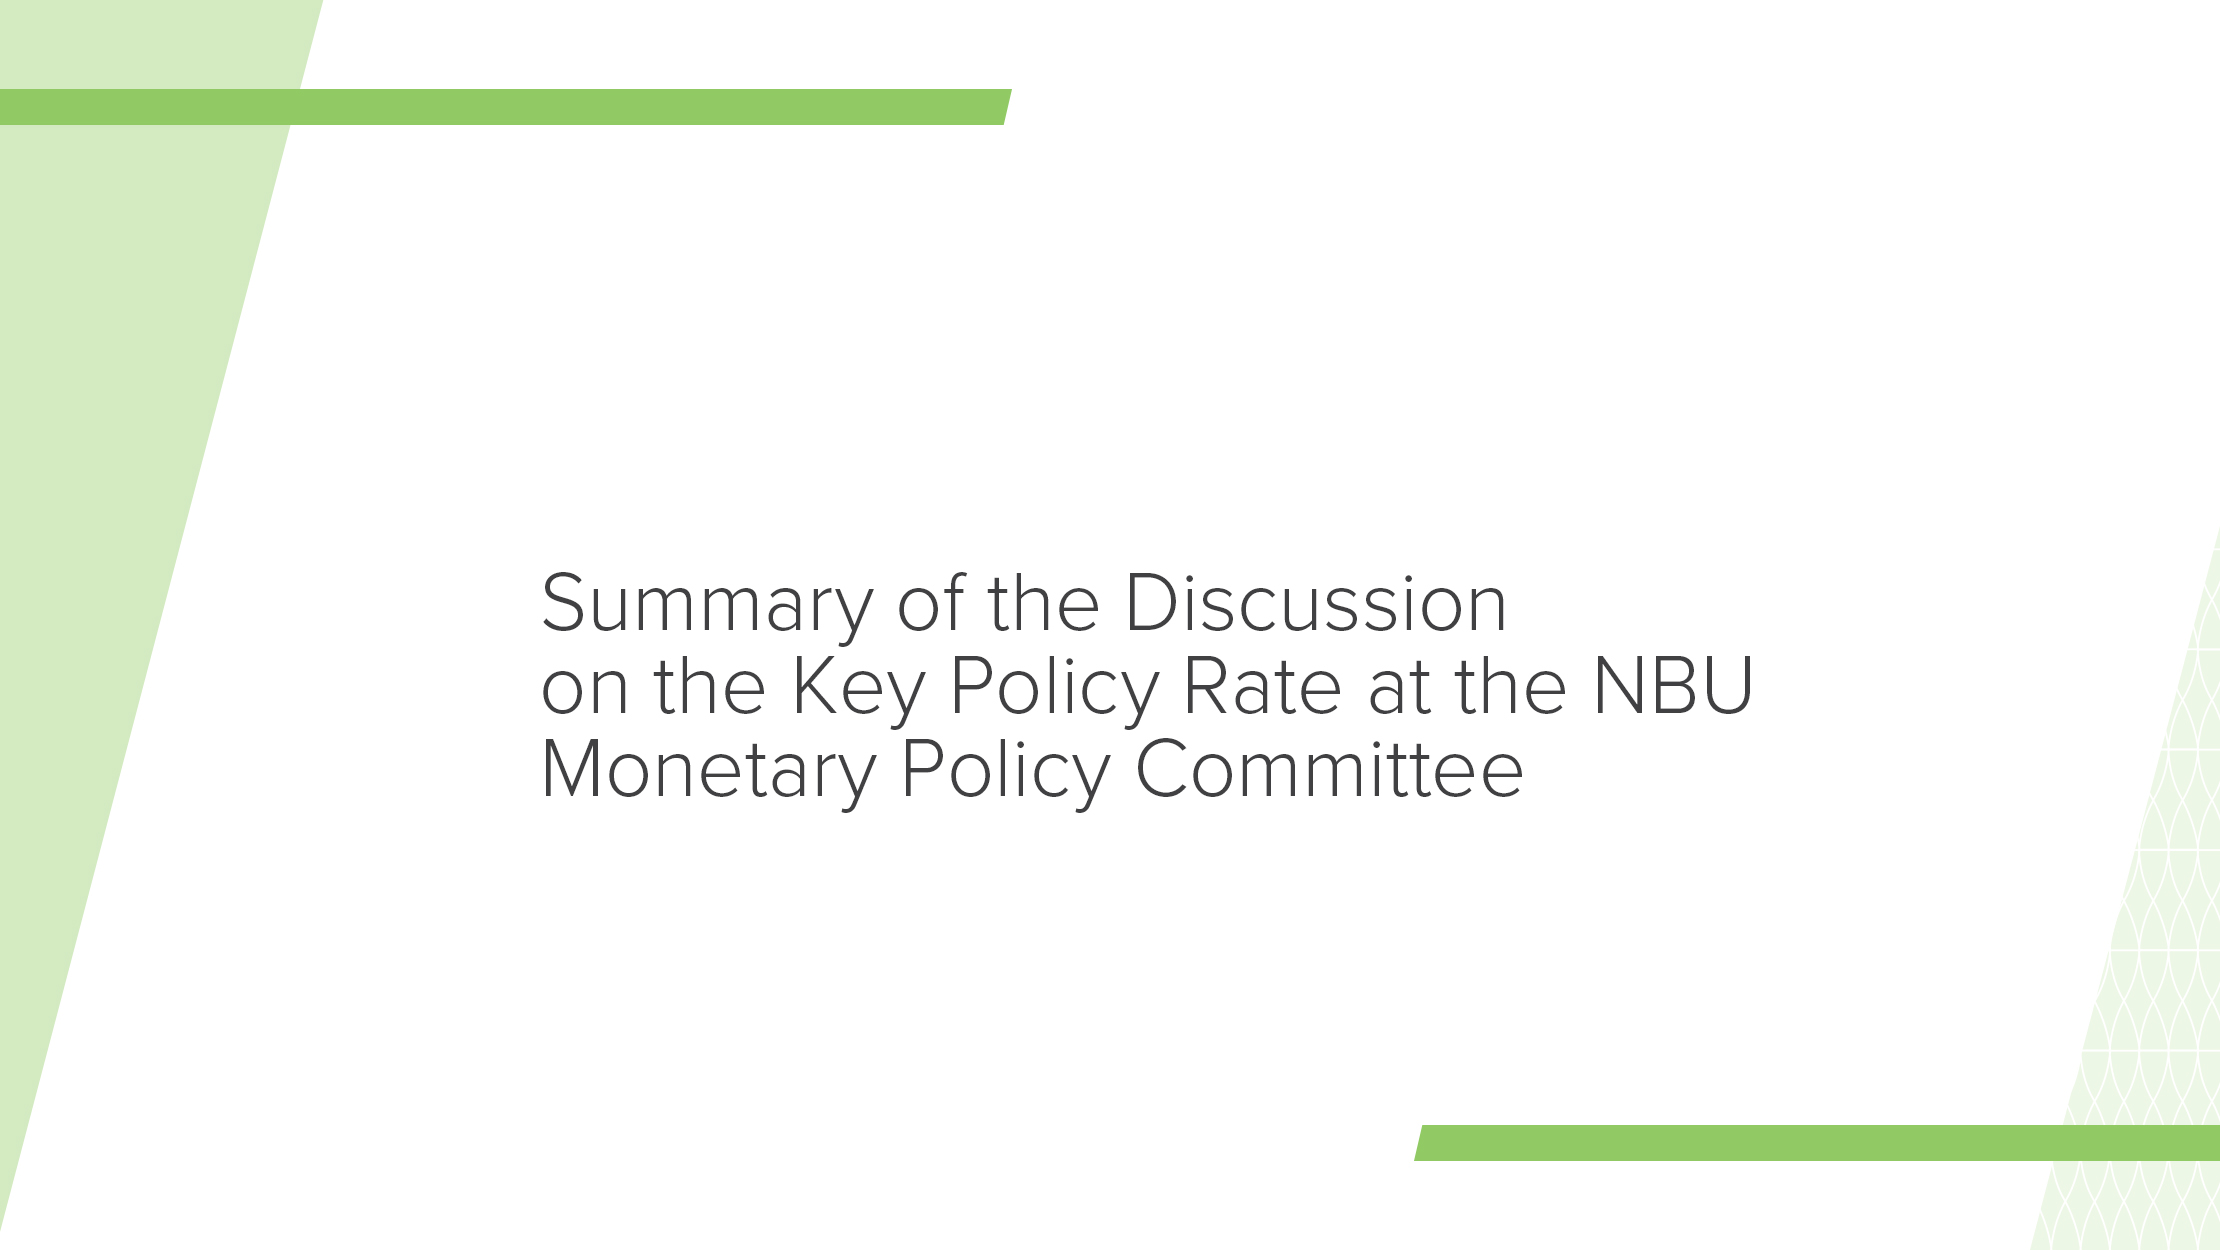 Summary of Key Policy Rate Discussion by NBU Monetary Policy Committee on 20 July 2022